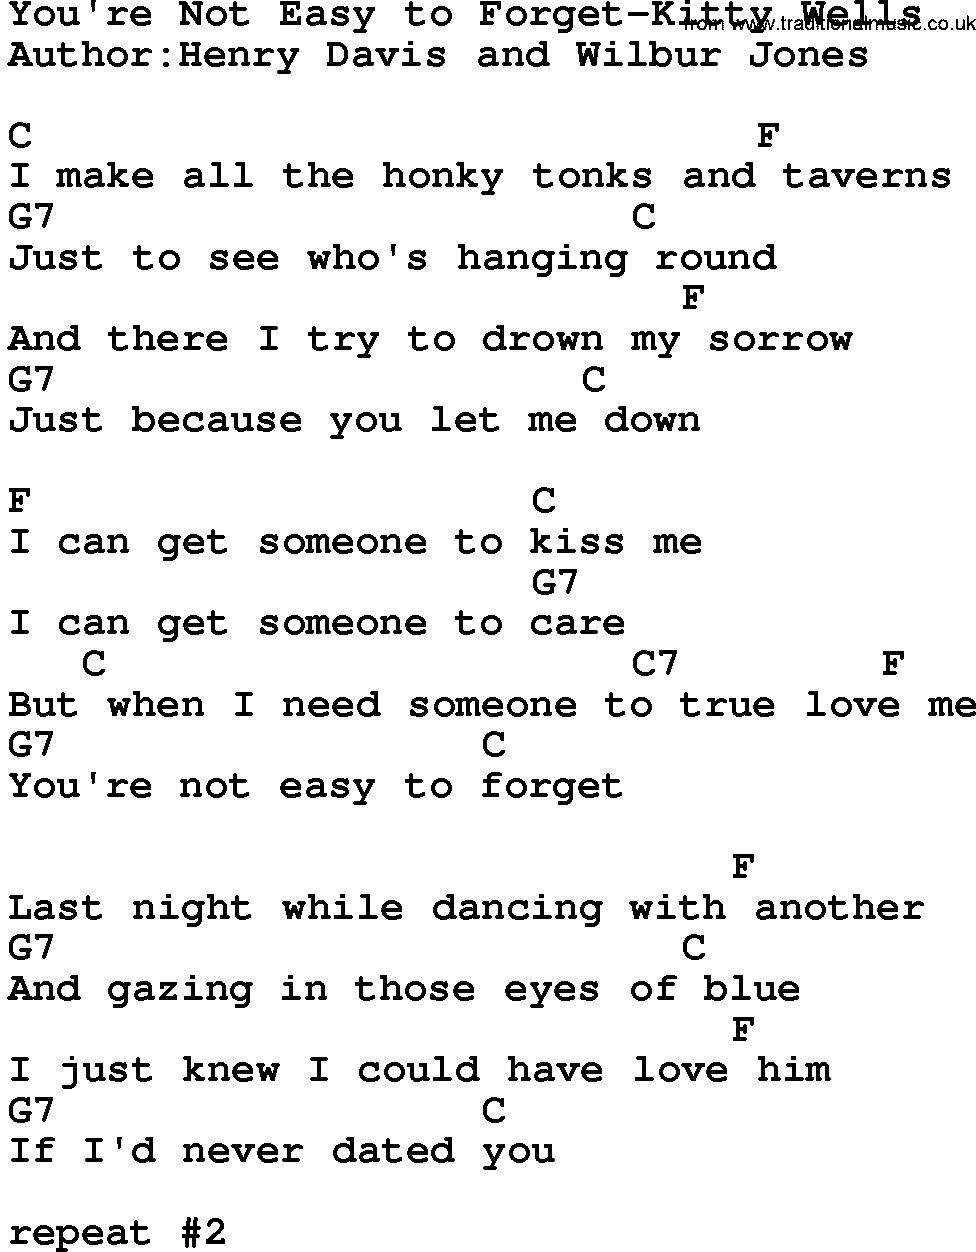 Country music song: You're Not Easy To Forget-Kitty Wells lyrics and chords